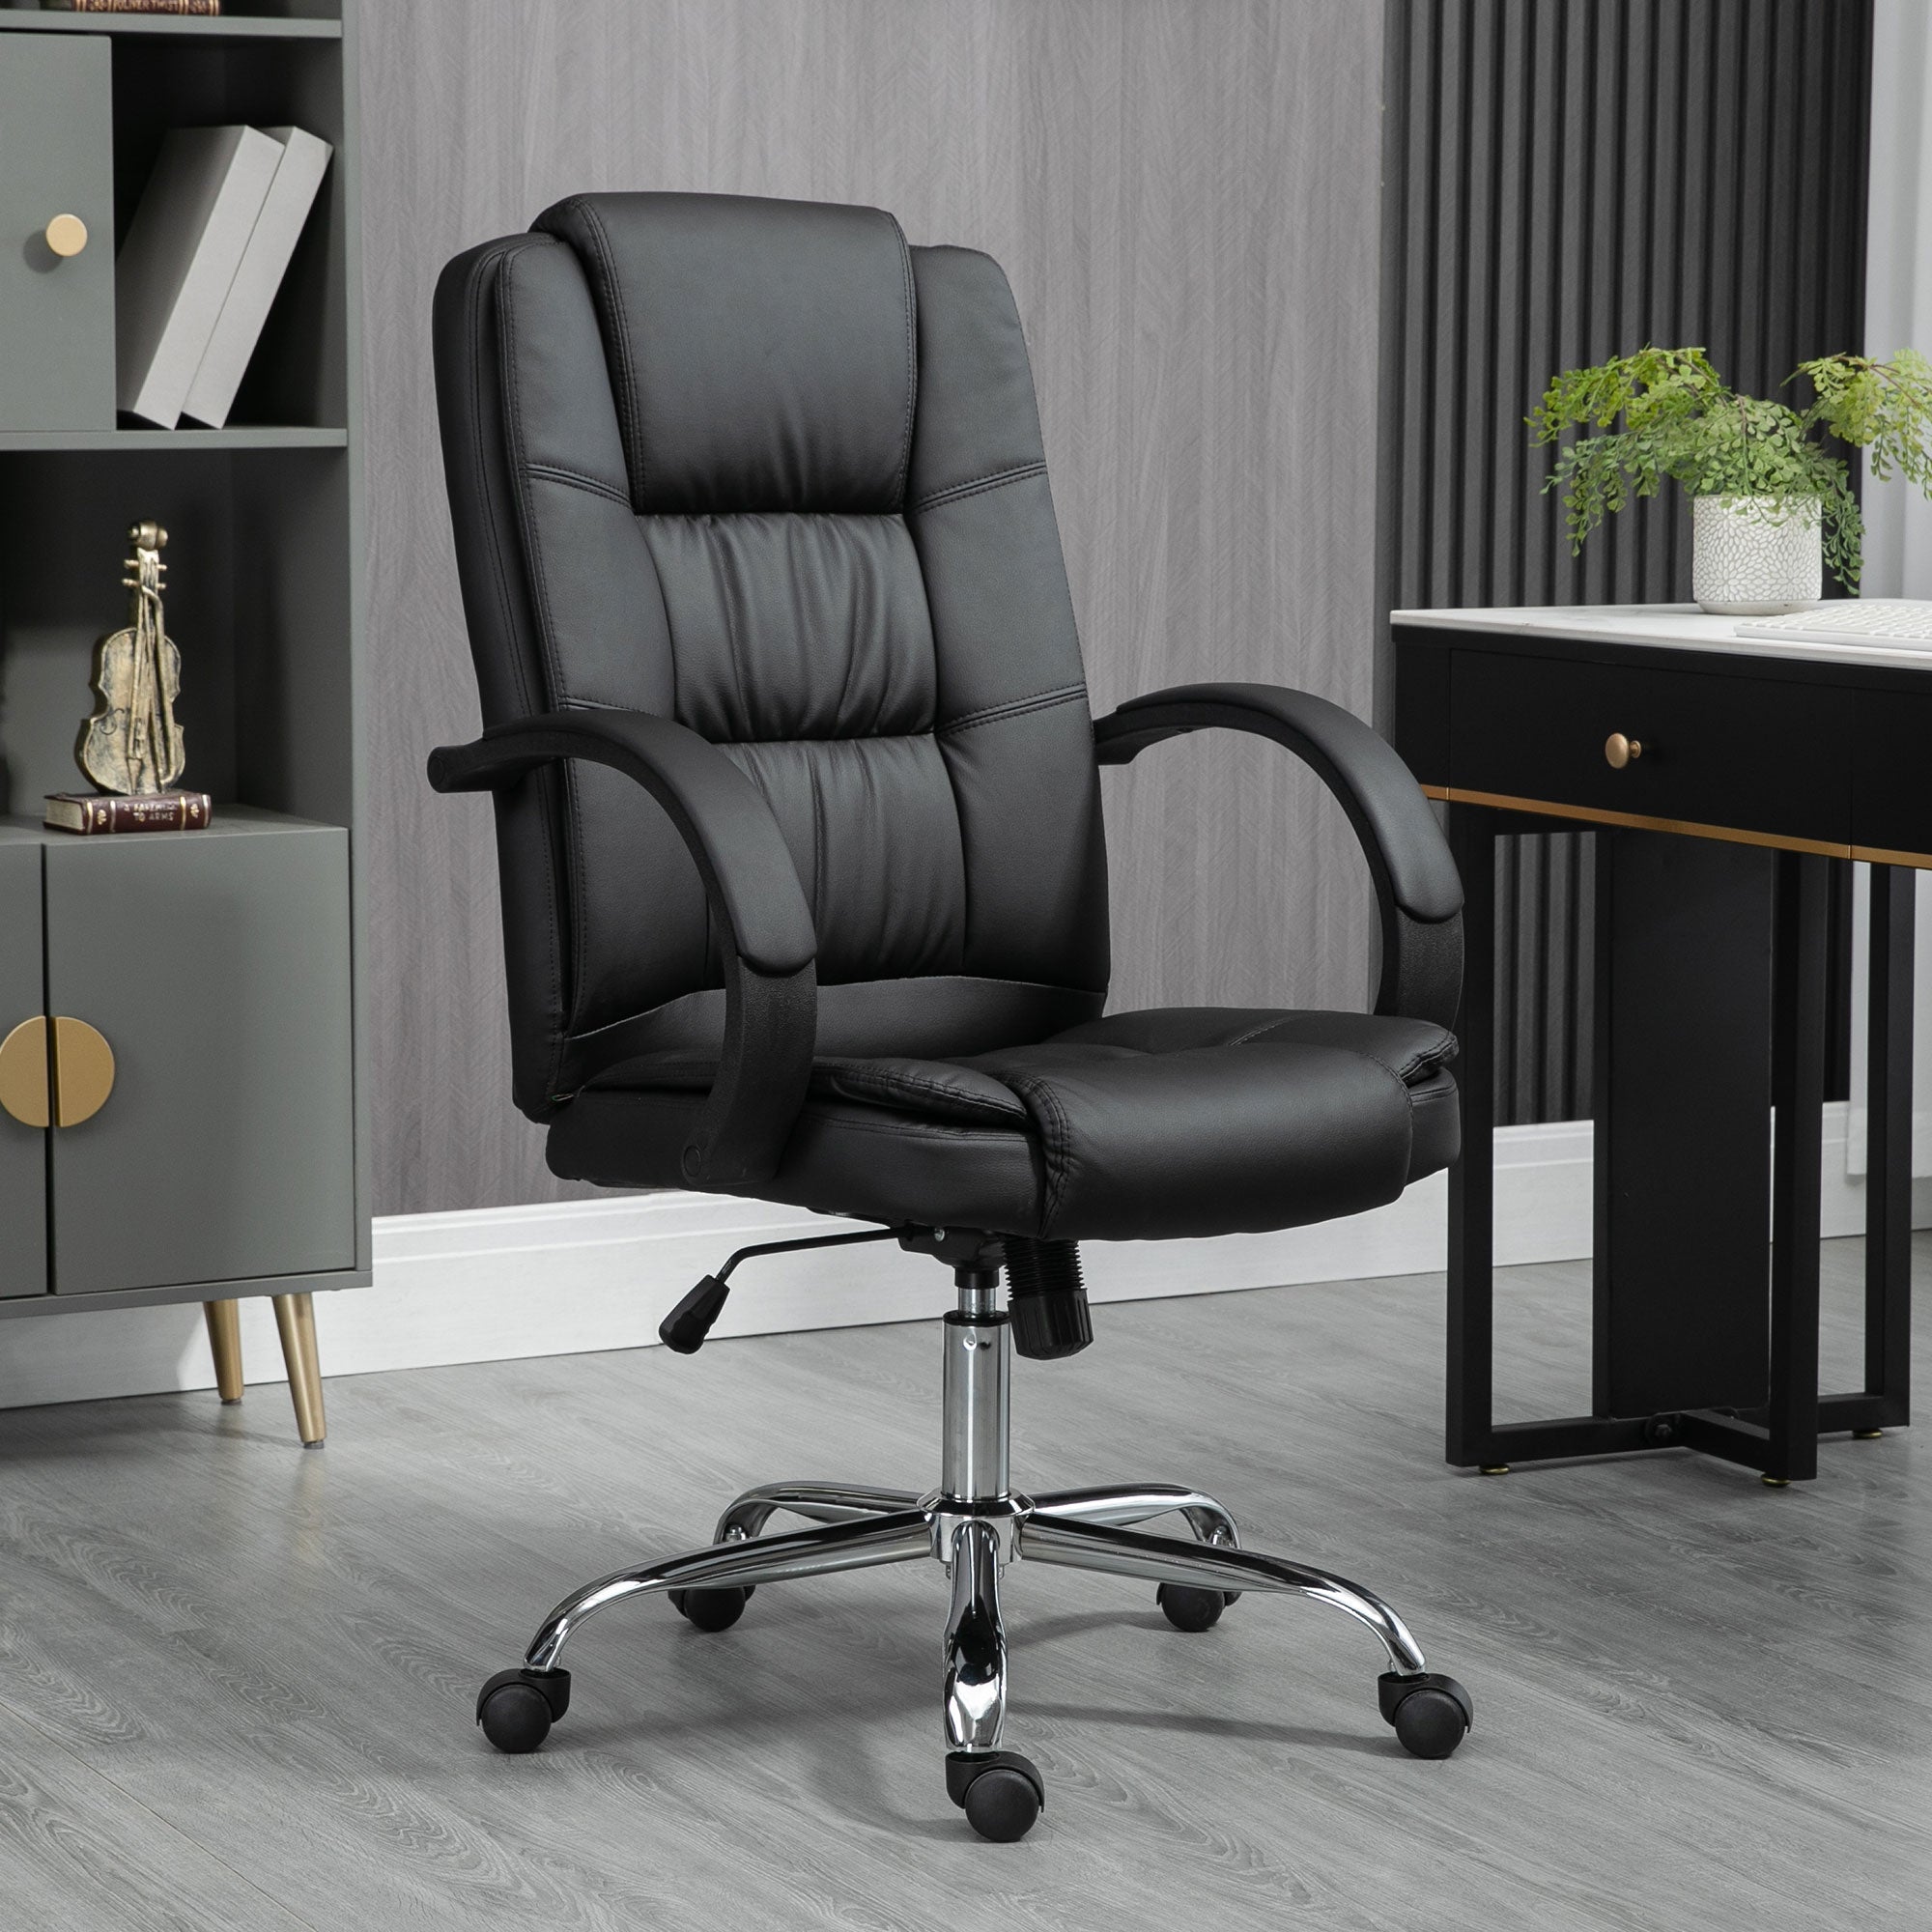 High Back Swivel Chair, PU Leather Executive Office Chair with Padded Armrests, Adjustable Height, Tilt Function, Black-1